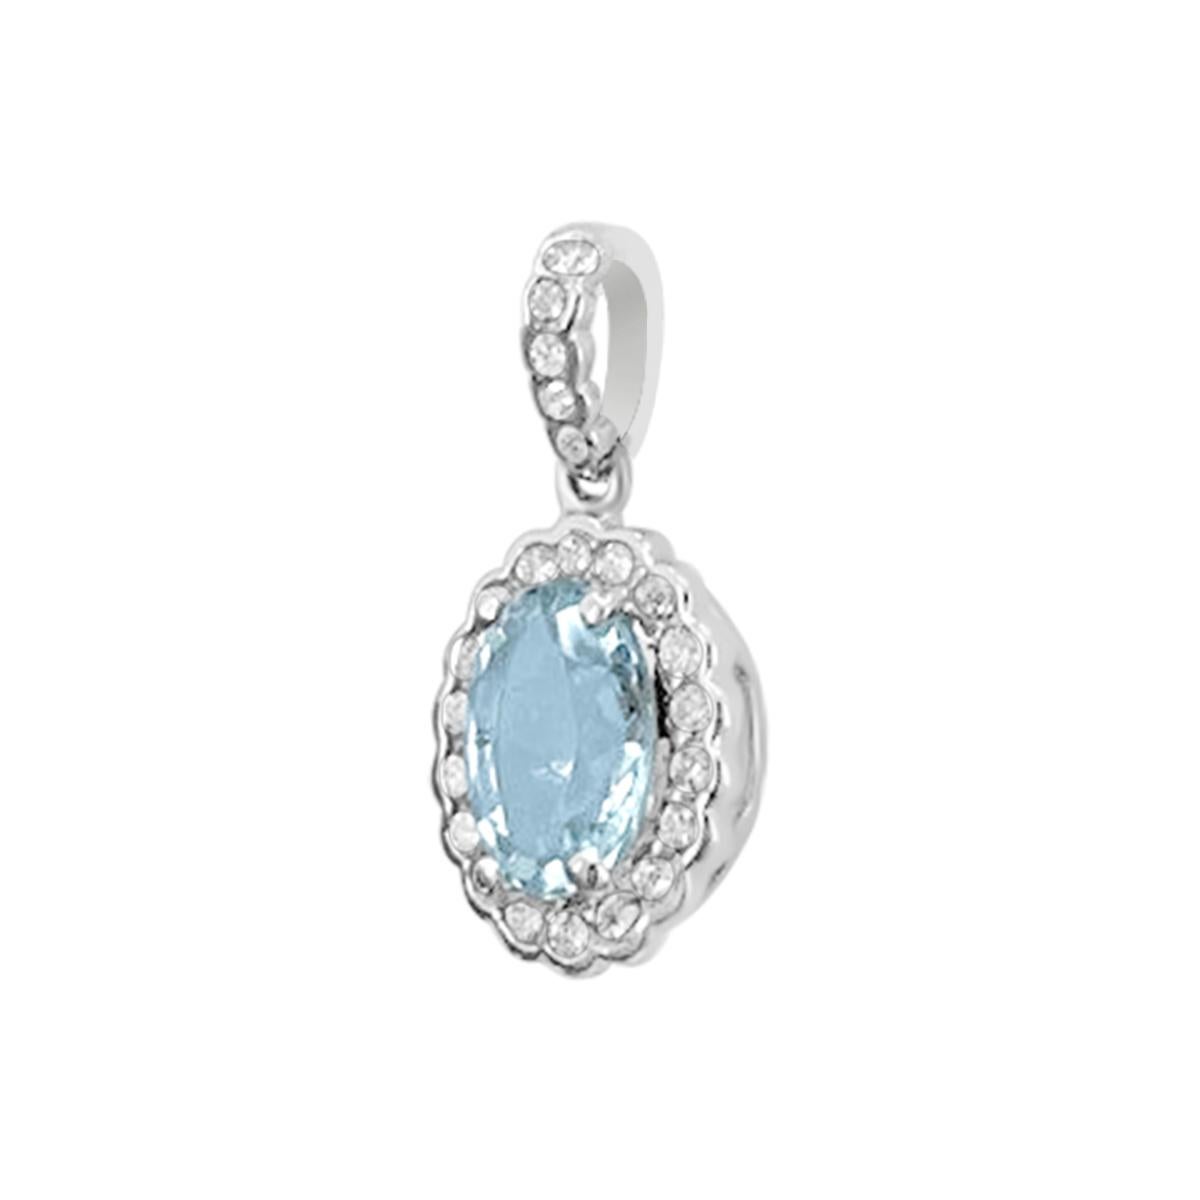 There Is No  Stopping The Unending Beauty Of This Beautiful Aquamarine And Diamond Pendant.
The Centre Piece Is A Stunning Sparkling 8x6mm Aquamarine In A Classic Oval Cut. 
This Aquamarine Is Clear, Icy Blue, Standing Out Magnificently  In 14K 